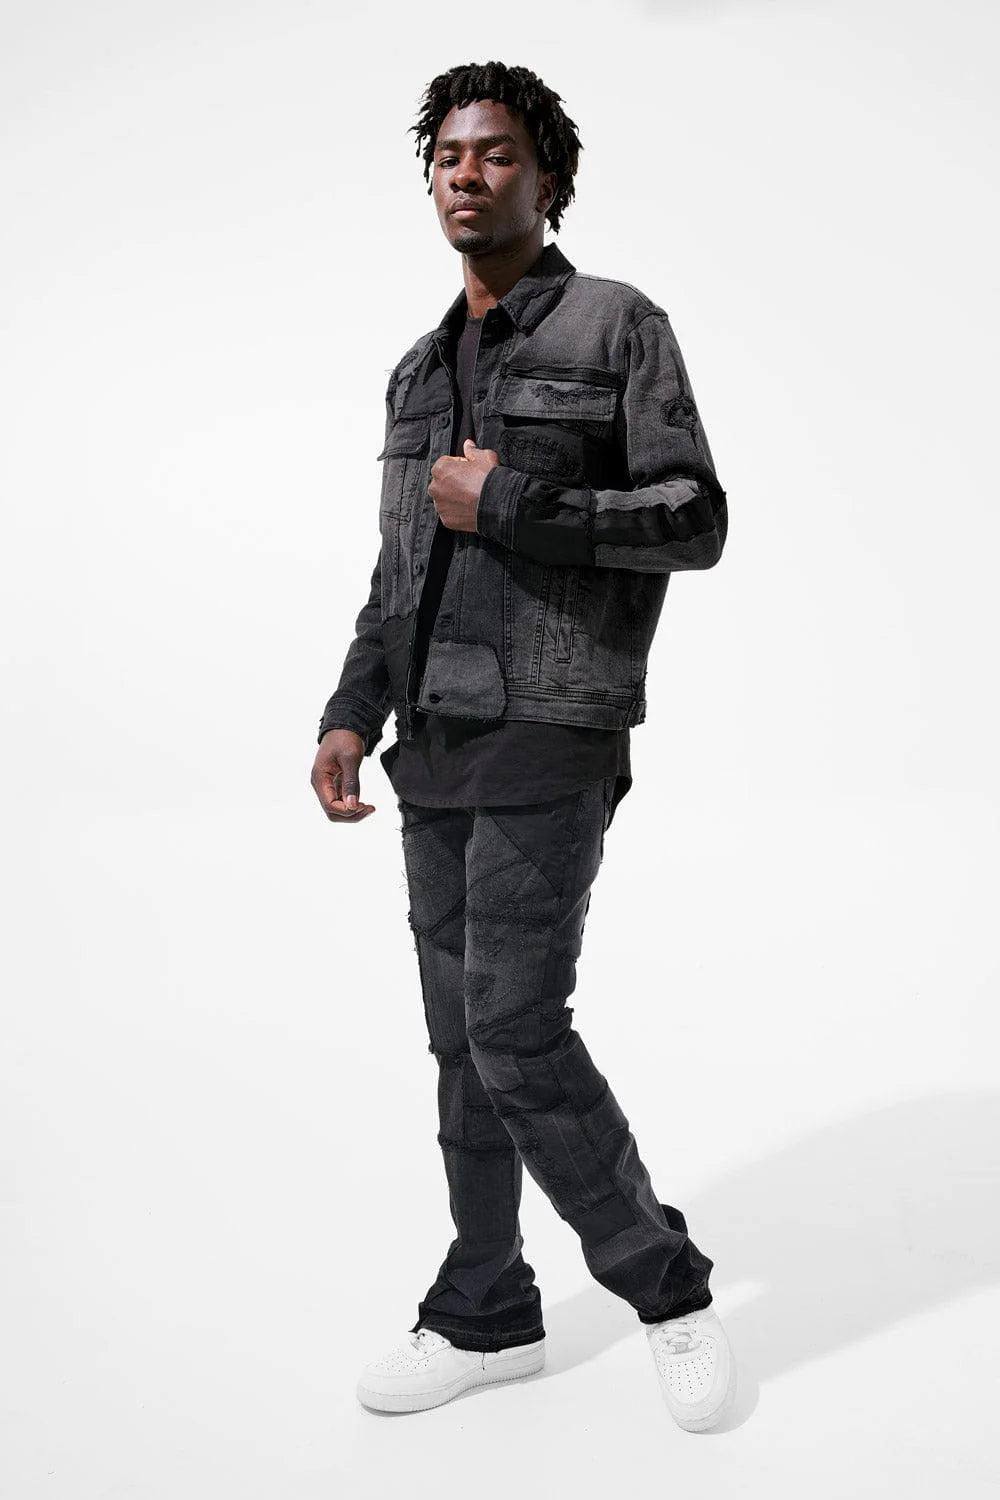 ROSS STACKED - LAWLESS DENIM (BLACK SHADOW) JRF1114